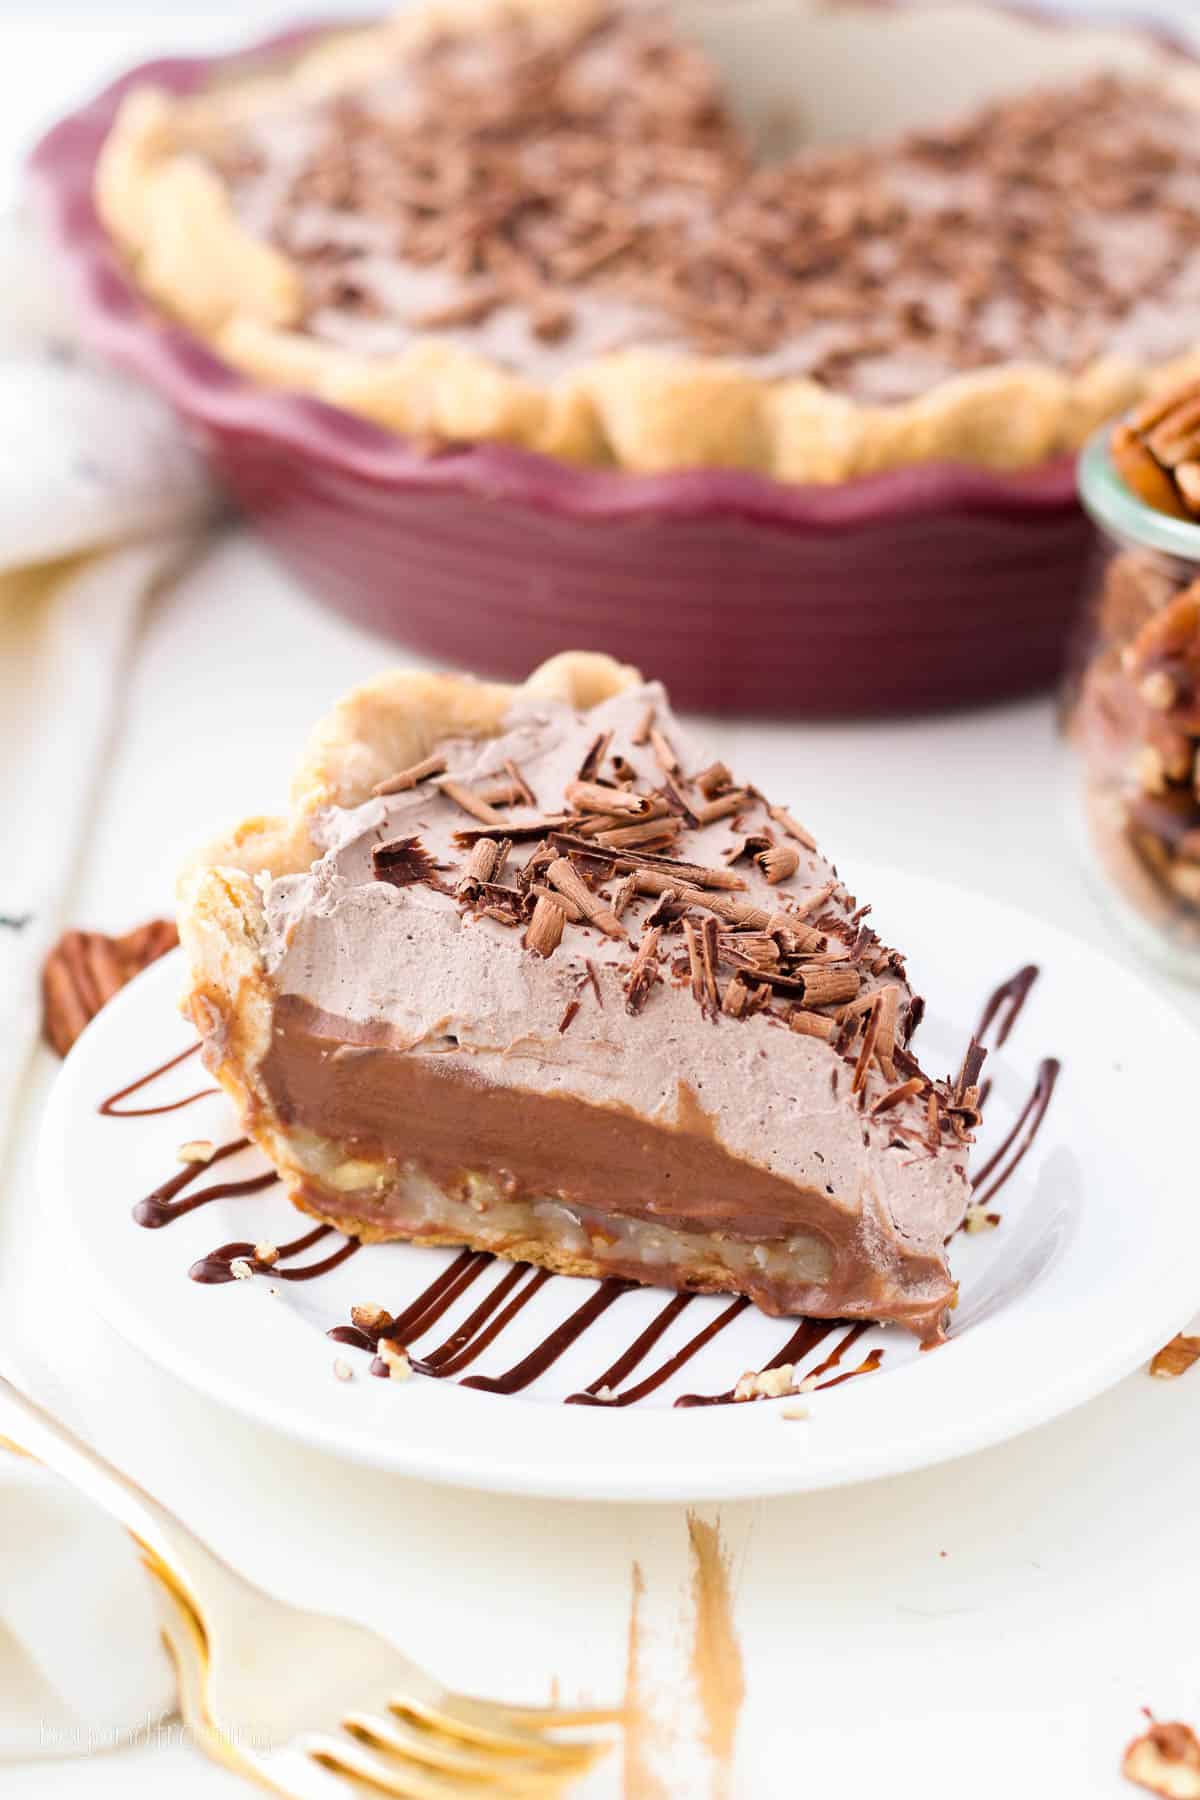 A slice of German chocolate pie on a white plate drizzled with chocolate sauce, with the rest of the pie in a pie plate in the background.